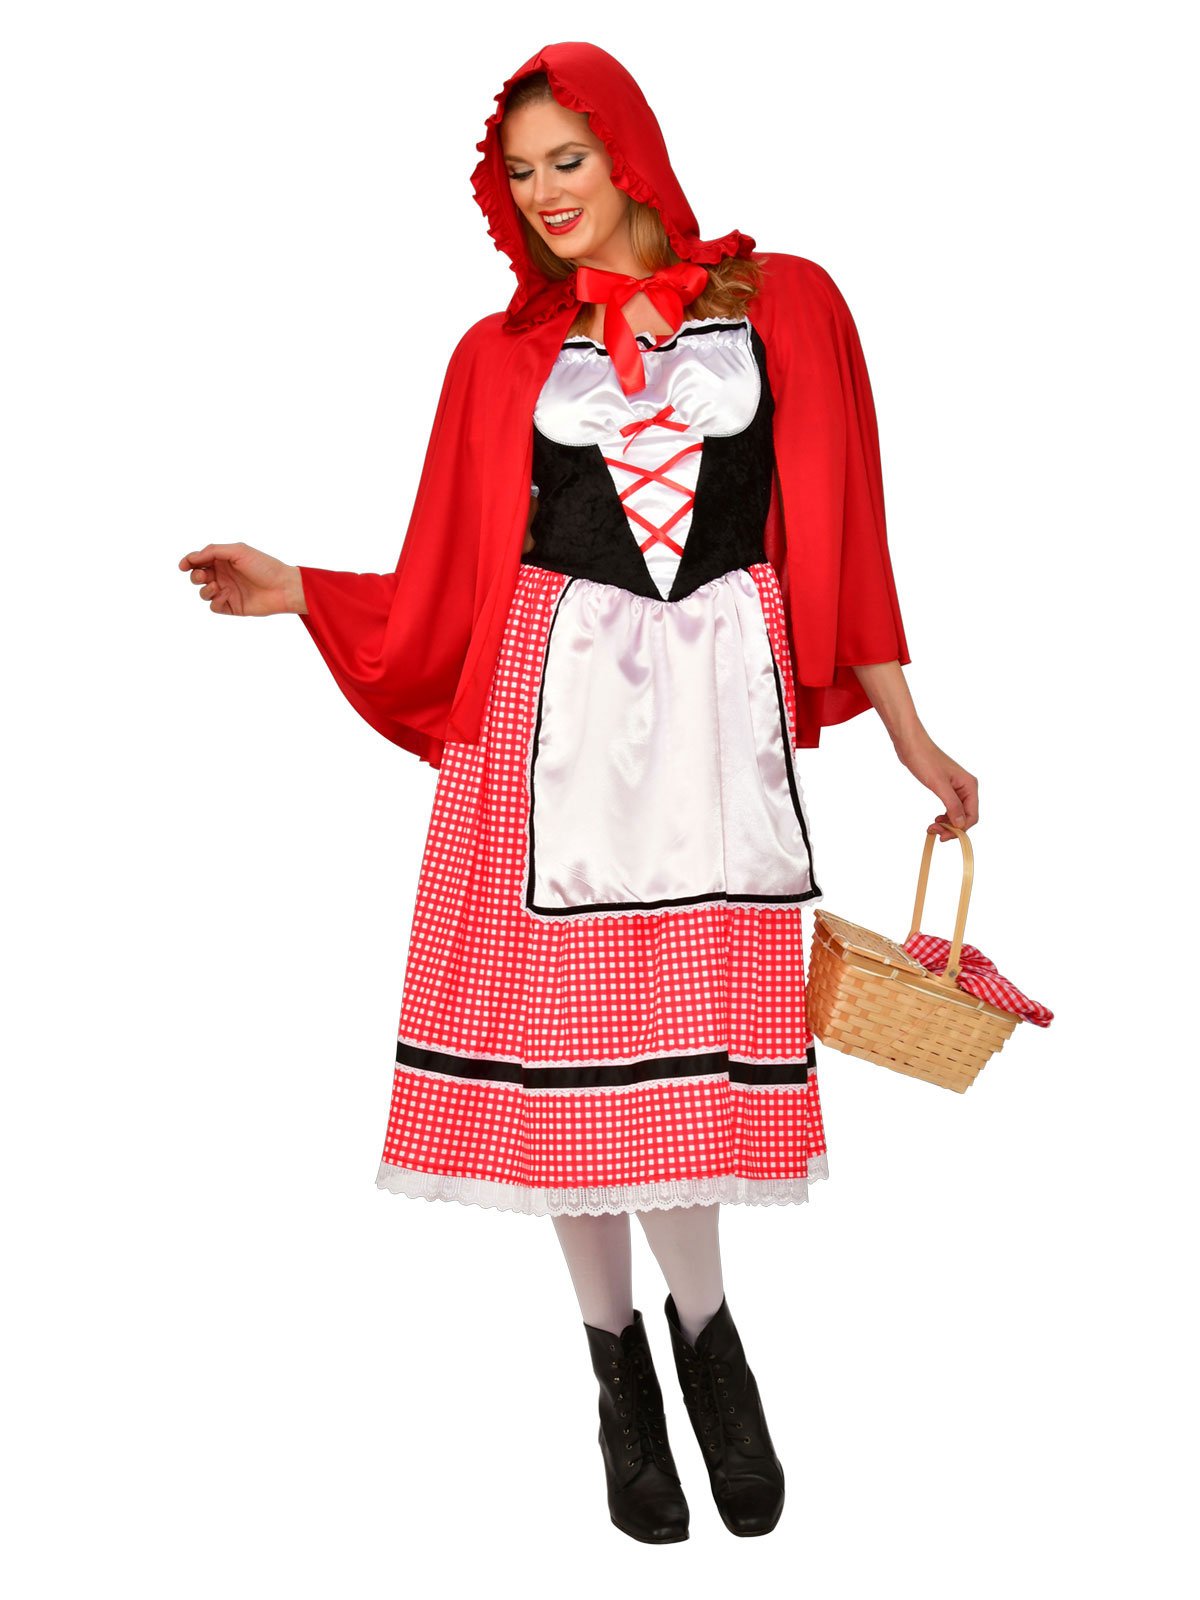 Costume Adult Red Riding Hood Large